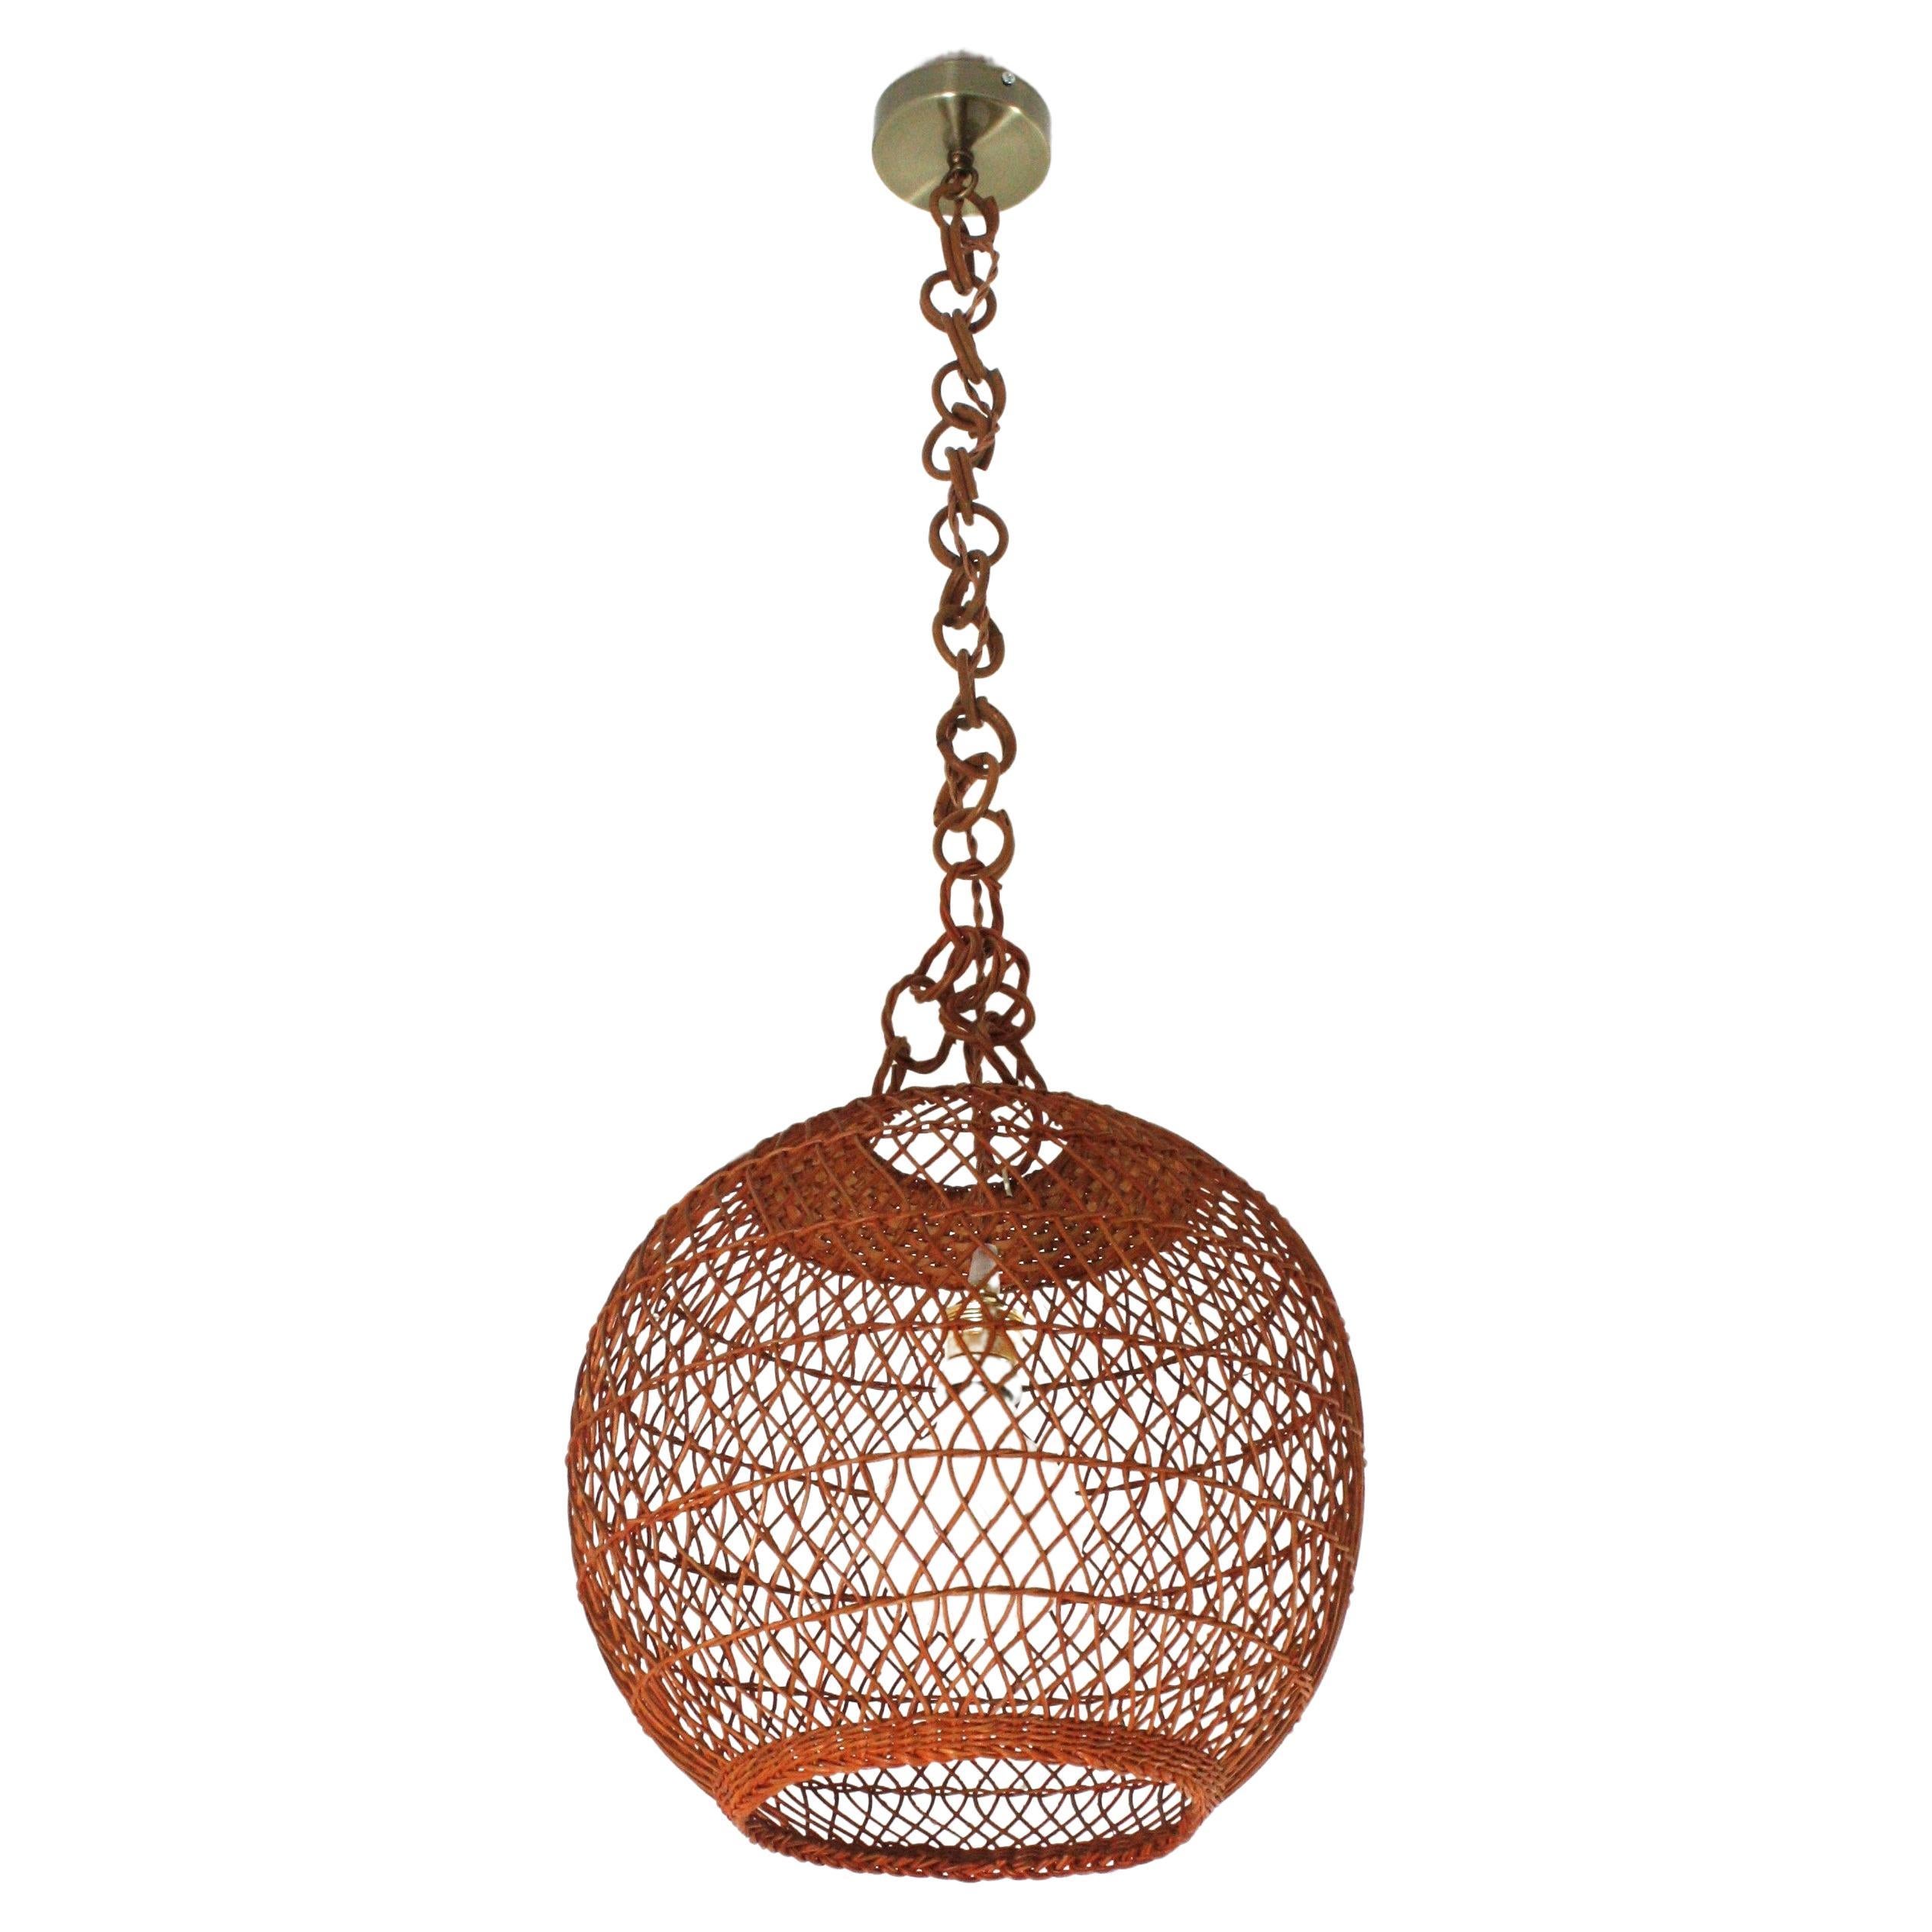 Large Globe Pendant Lamp, Wicker, Rattan
Eye-catching handcrafted braided rattan / wicker pendant hanging lamp. Spain, 1960s.
This beautiful suspension lamp features a hand-woven wicker globe shaped lampshade. It hangs from a chain with  rattan